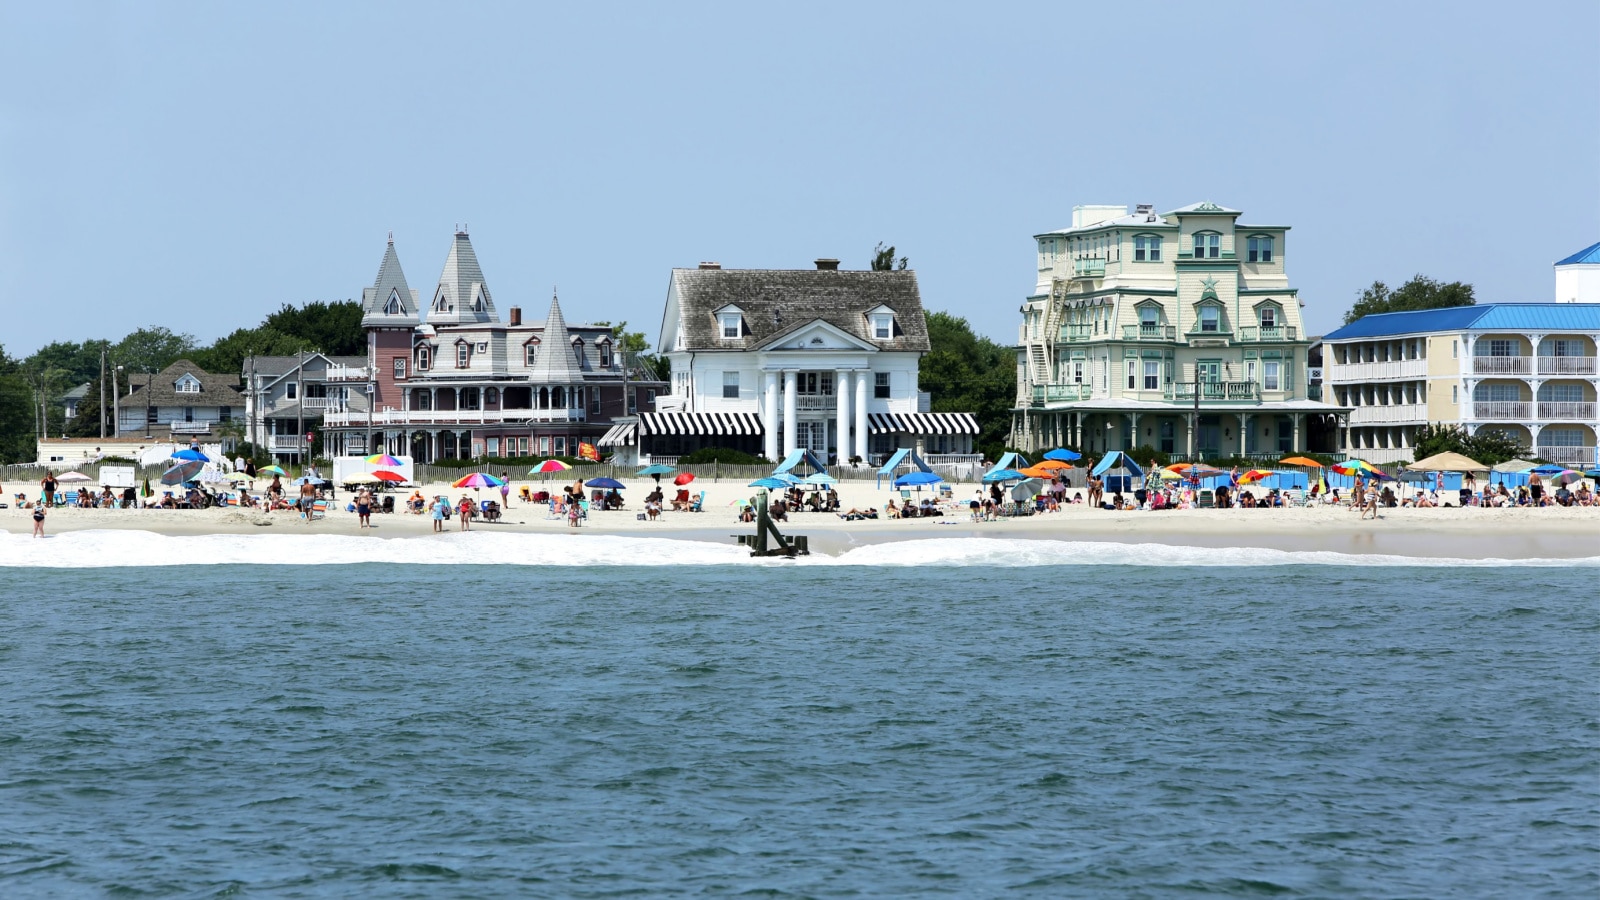 Cape May, NJ, June 24, 2015: Beach goers enjoy a beautiful day in Cape May, New Jersey.